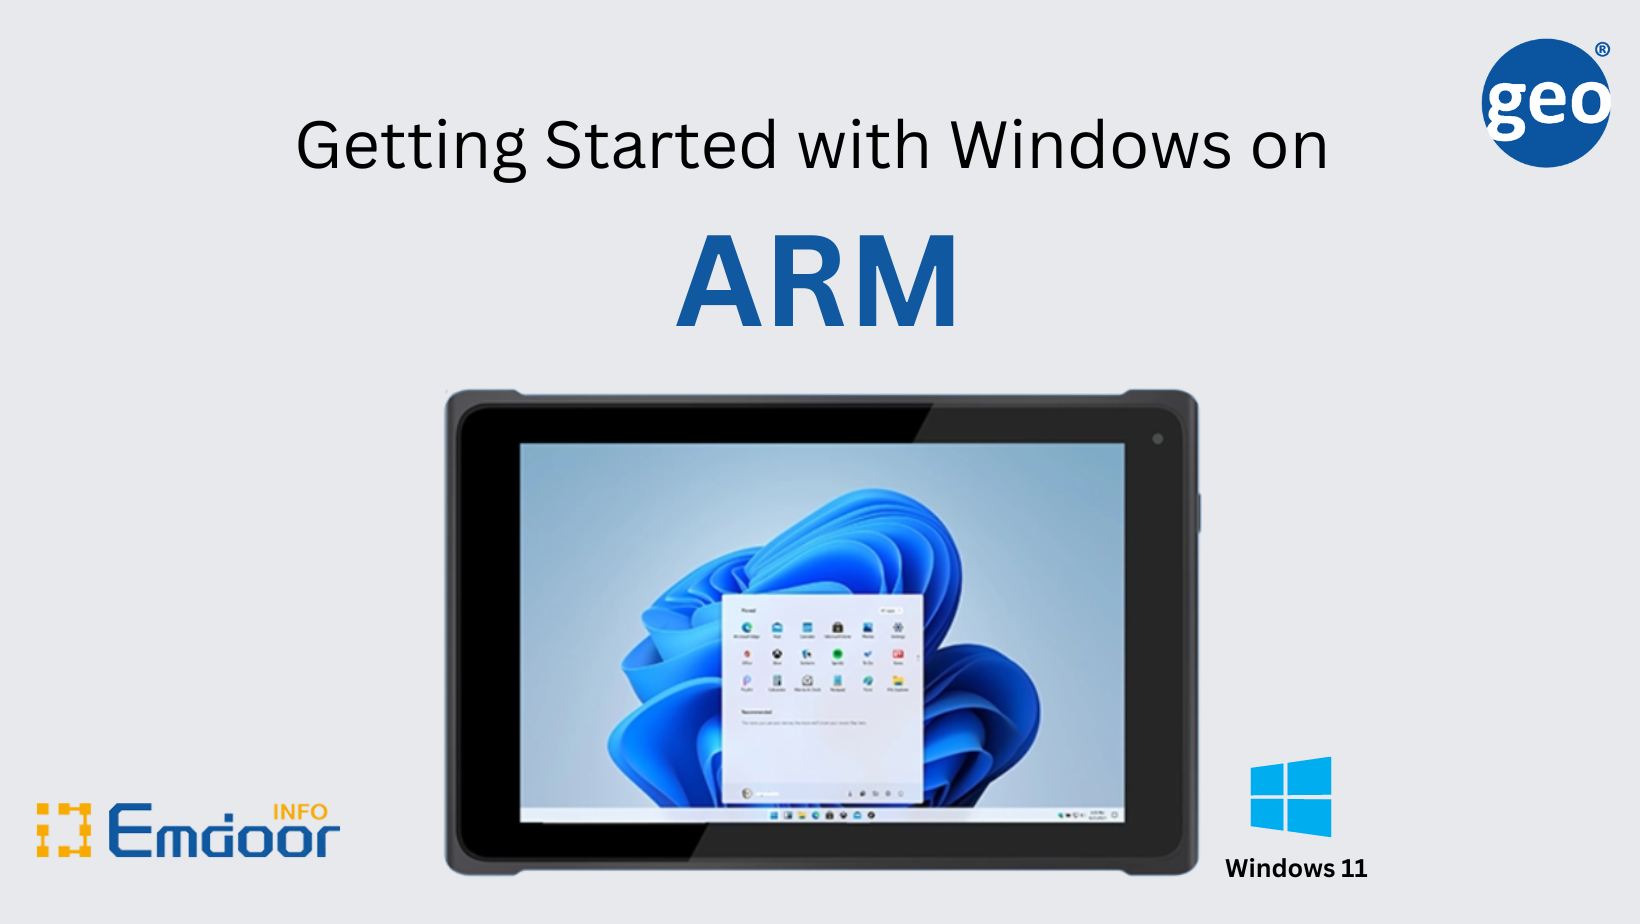 EMDOOR INFO| Windows 11 on Arm devices is now supported in Emdoor devices to deliver the performance you need.